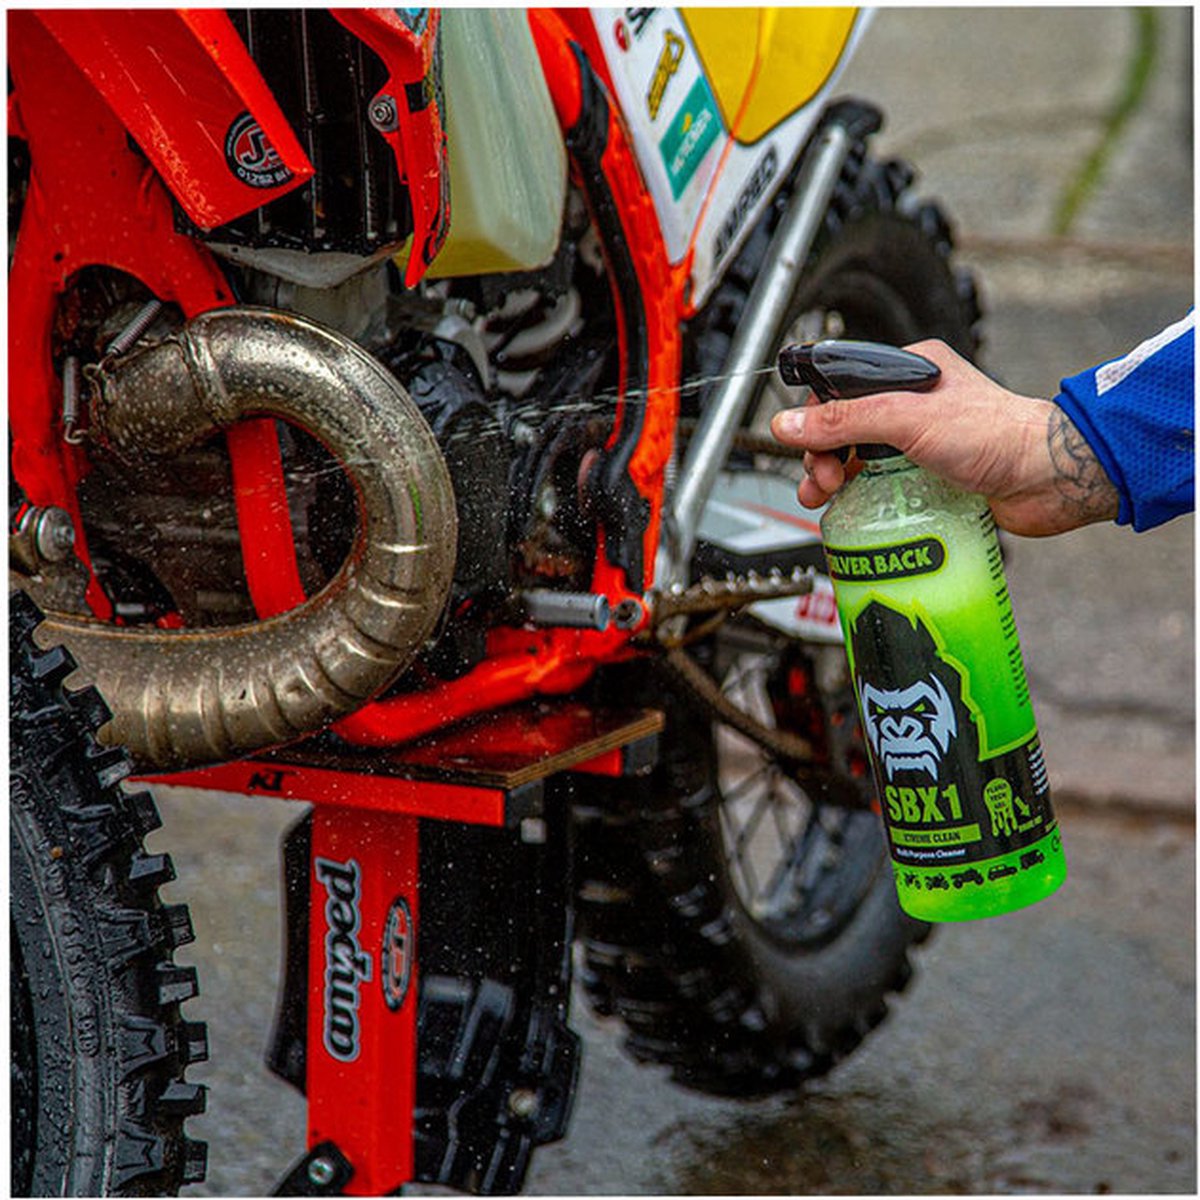 Powerful motorcycle cleaner